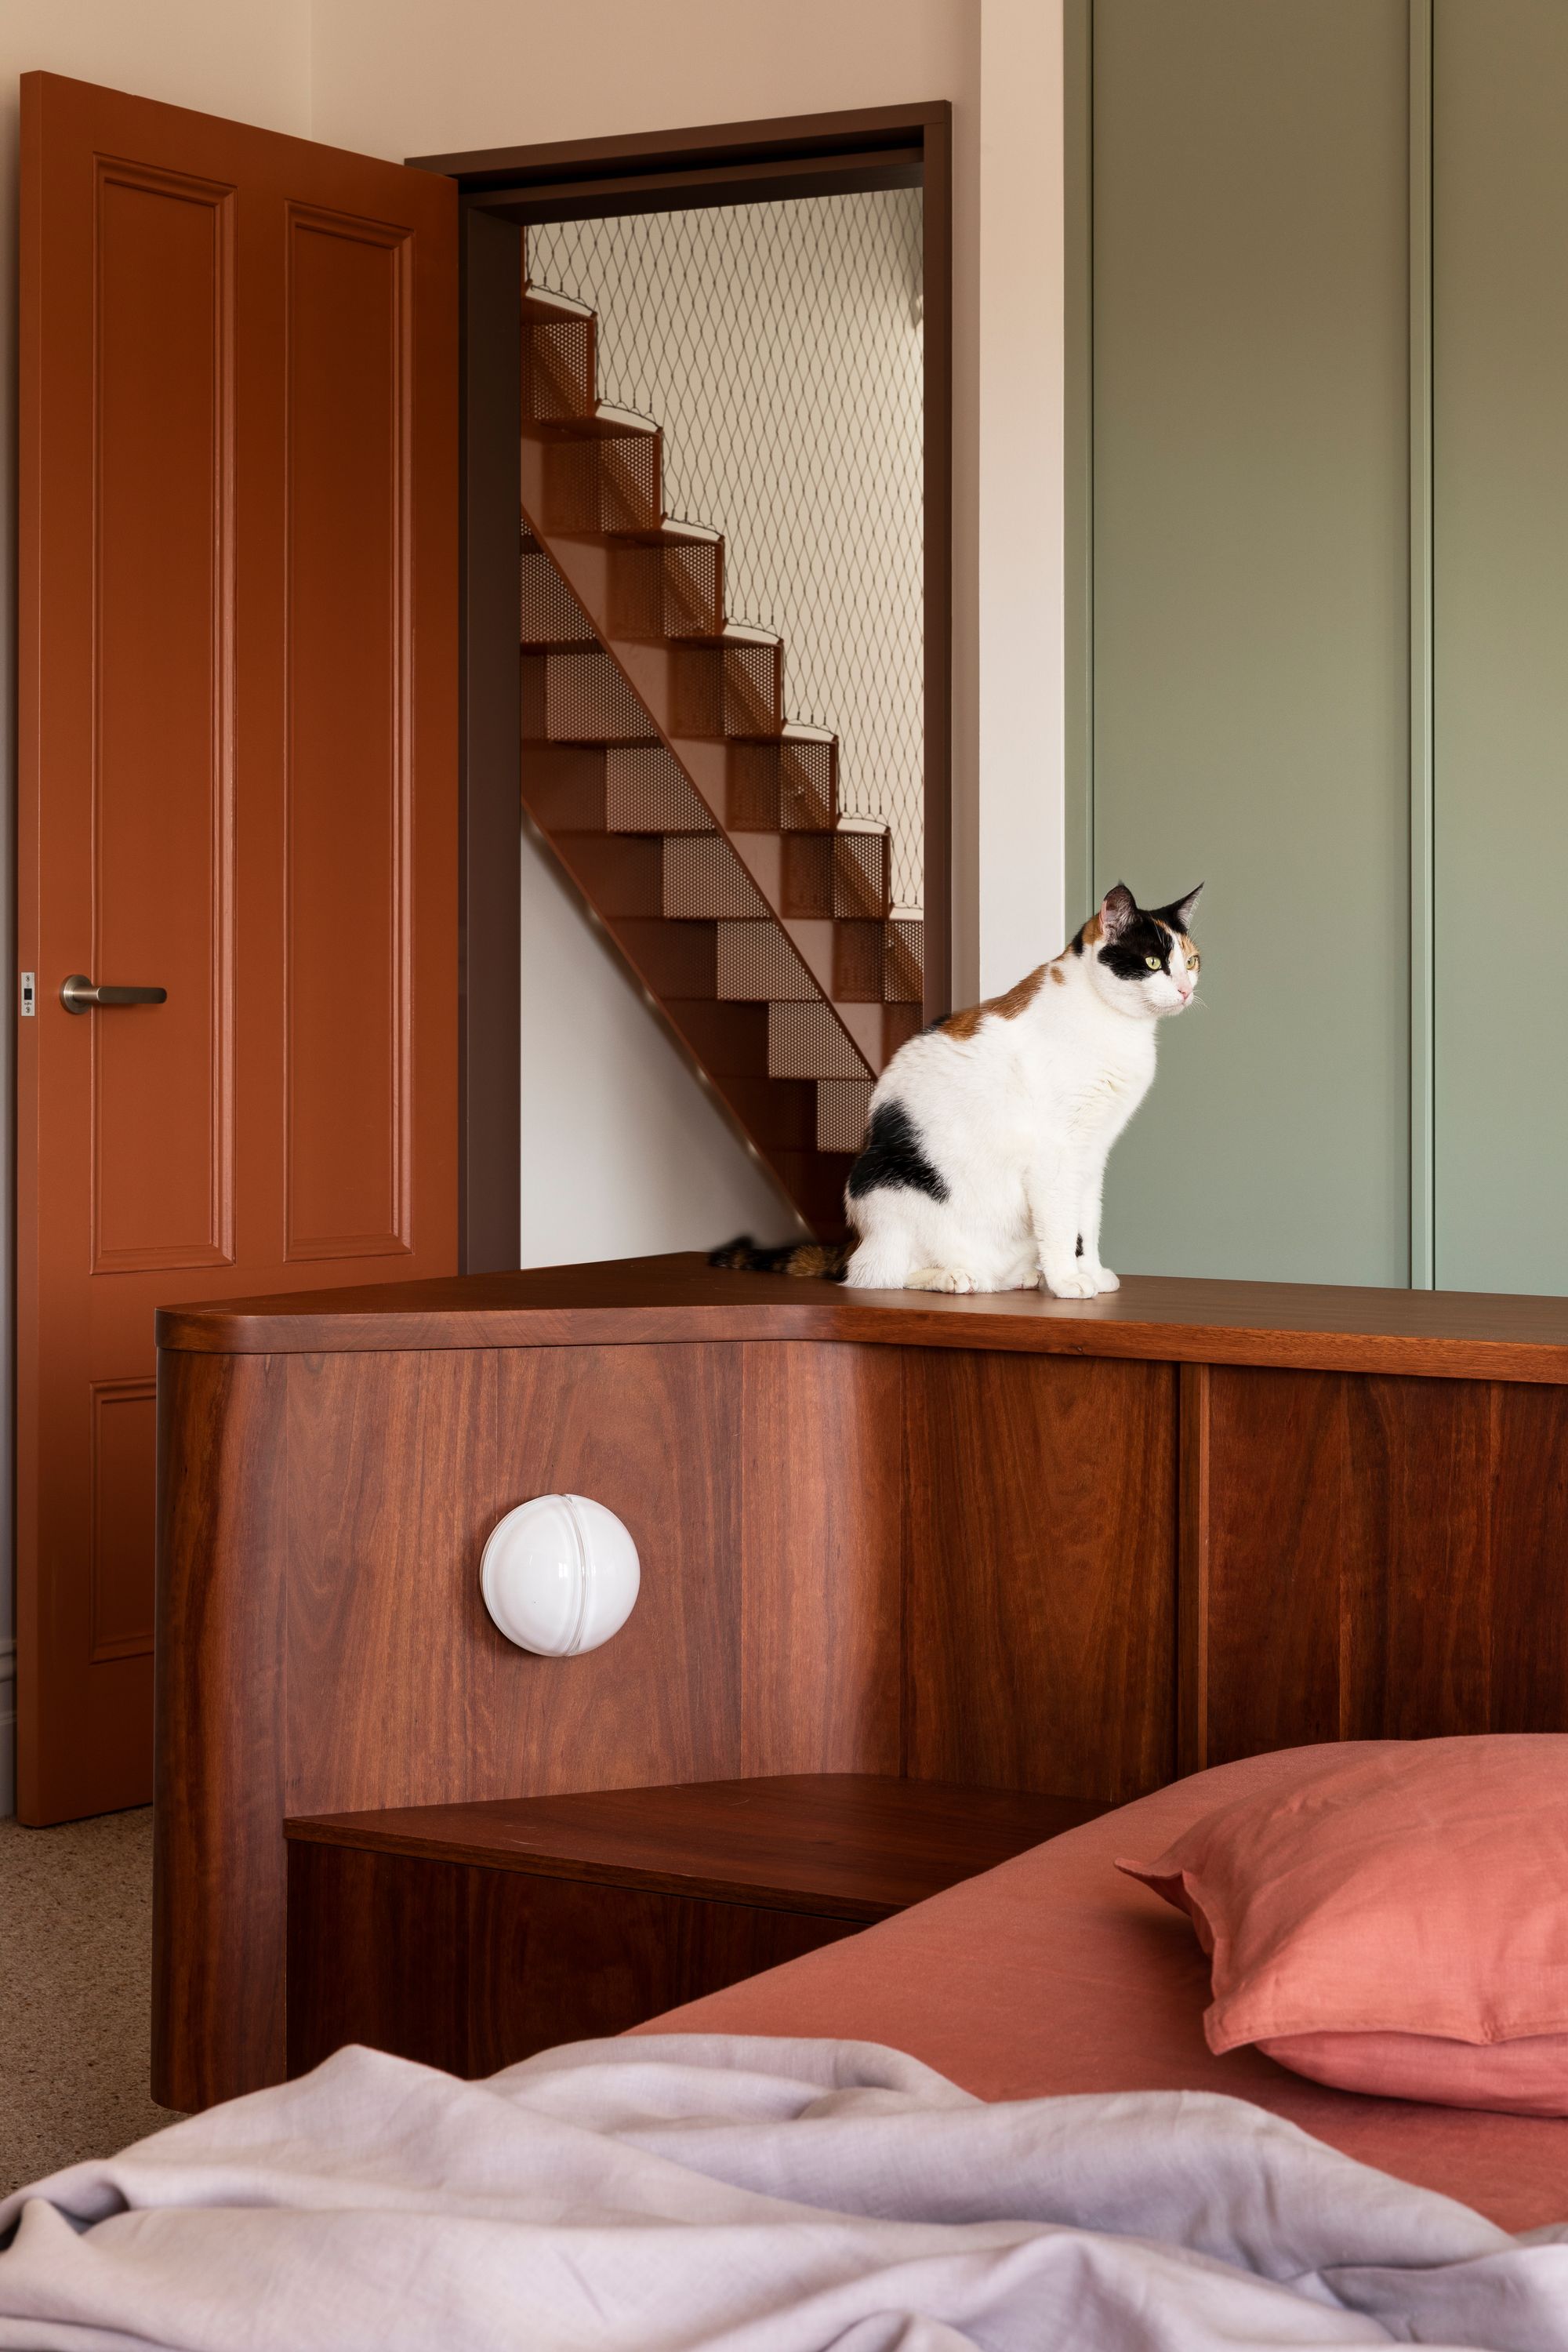 Hermon by WOWOWA. Master bedroom suite, cat posed on bed board